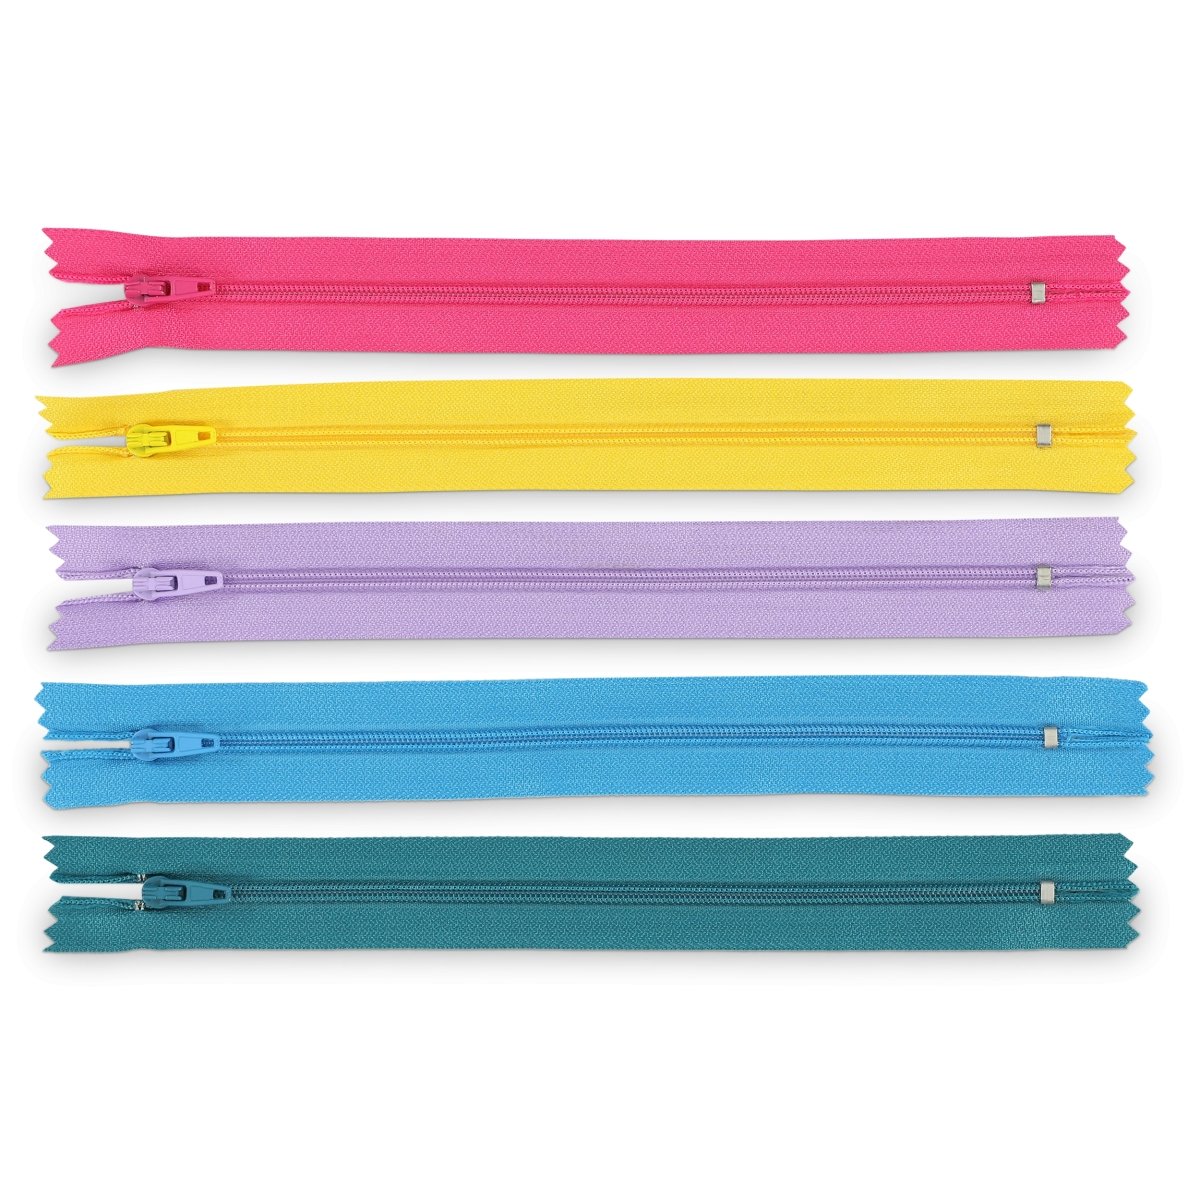 5 long standard zippers in 5 different colors